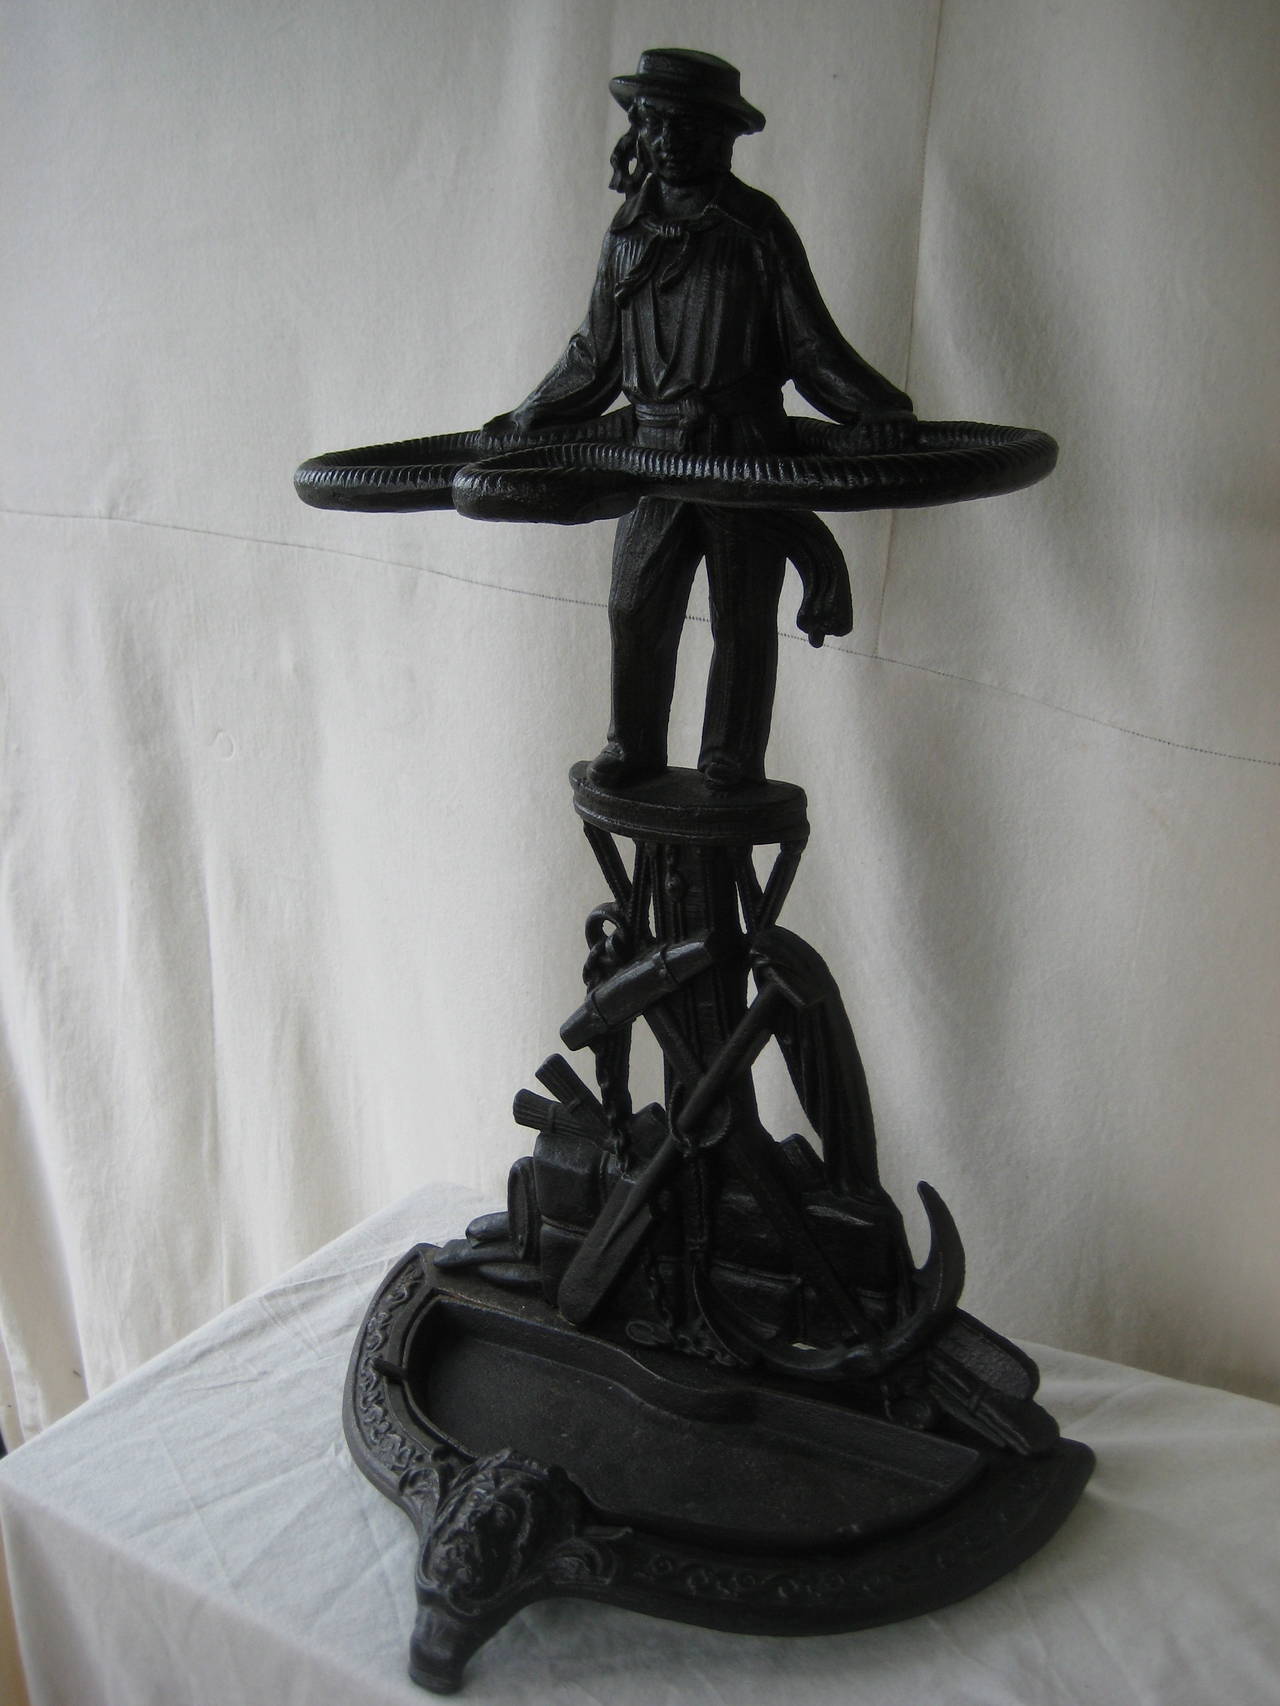 Cast Iron Umbrella Stand with a Sailor and his gear.